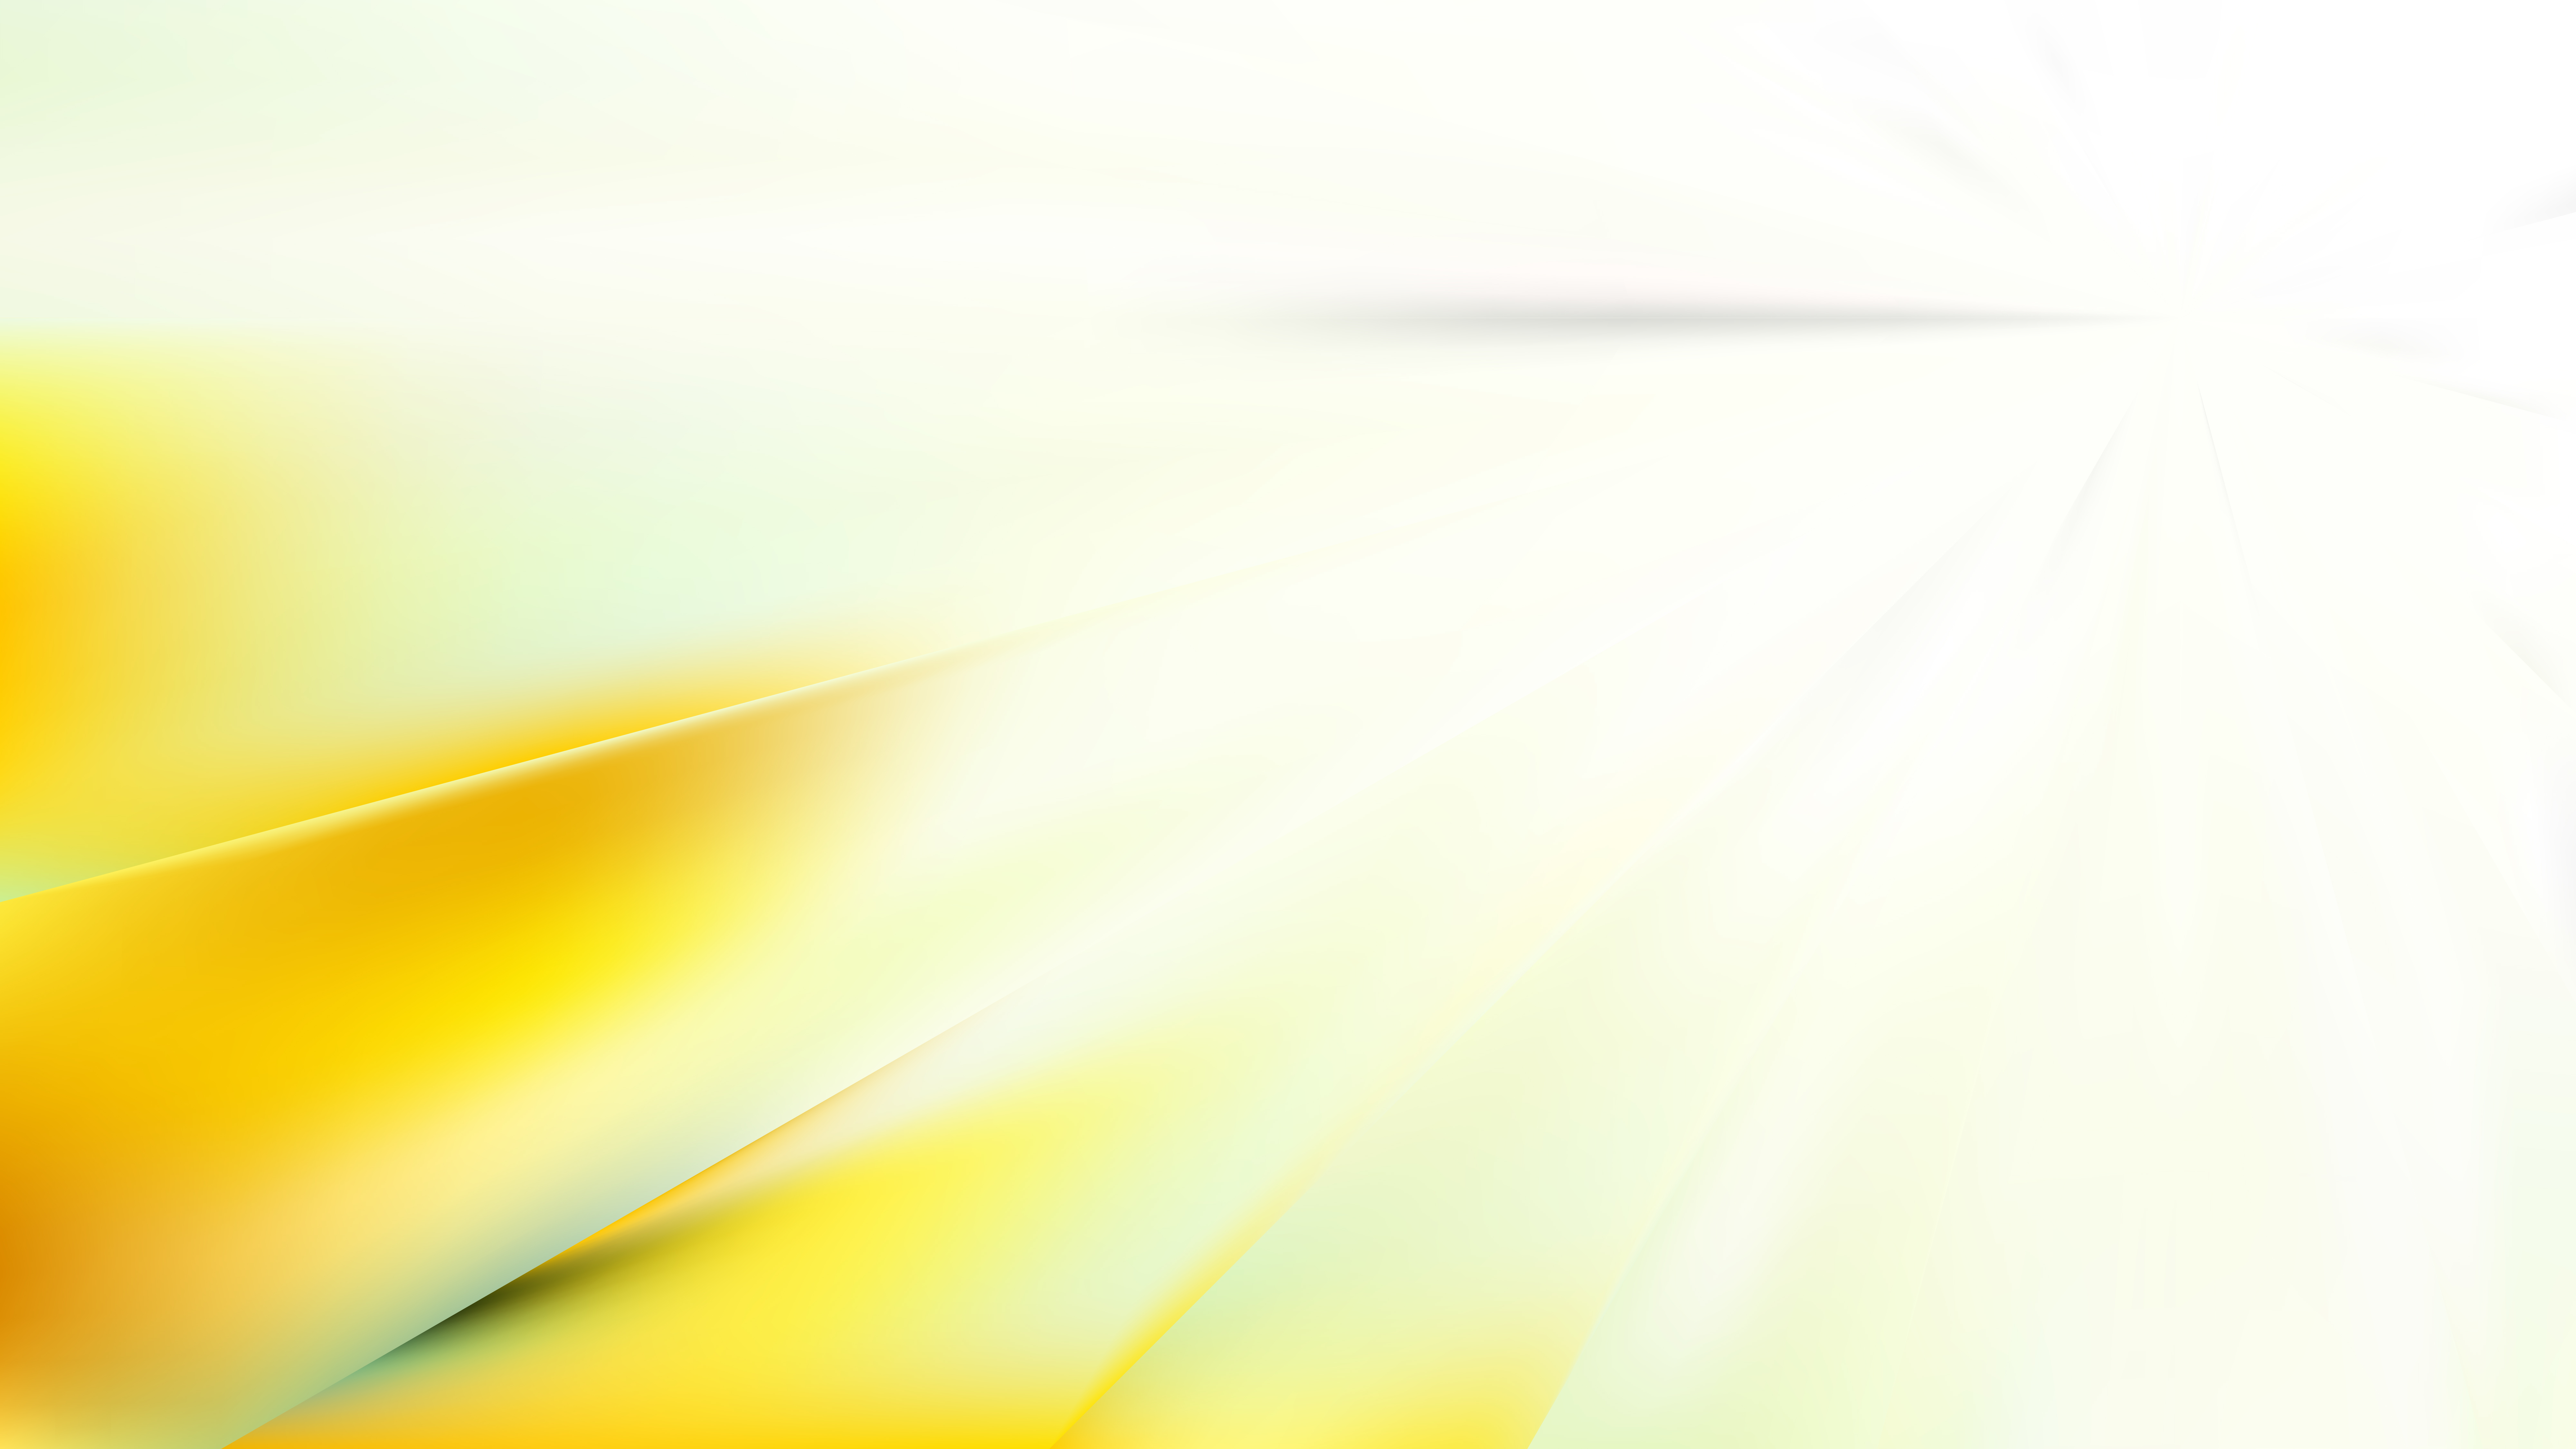 Free Light Yellow Abstract Background Vector Image